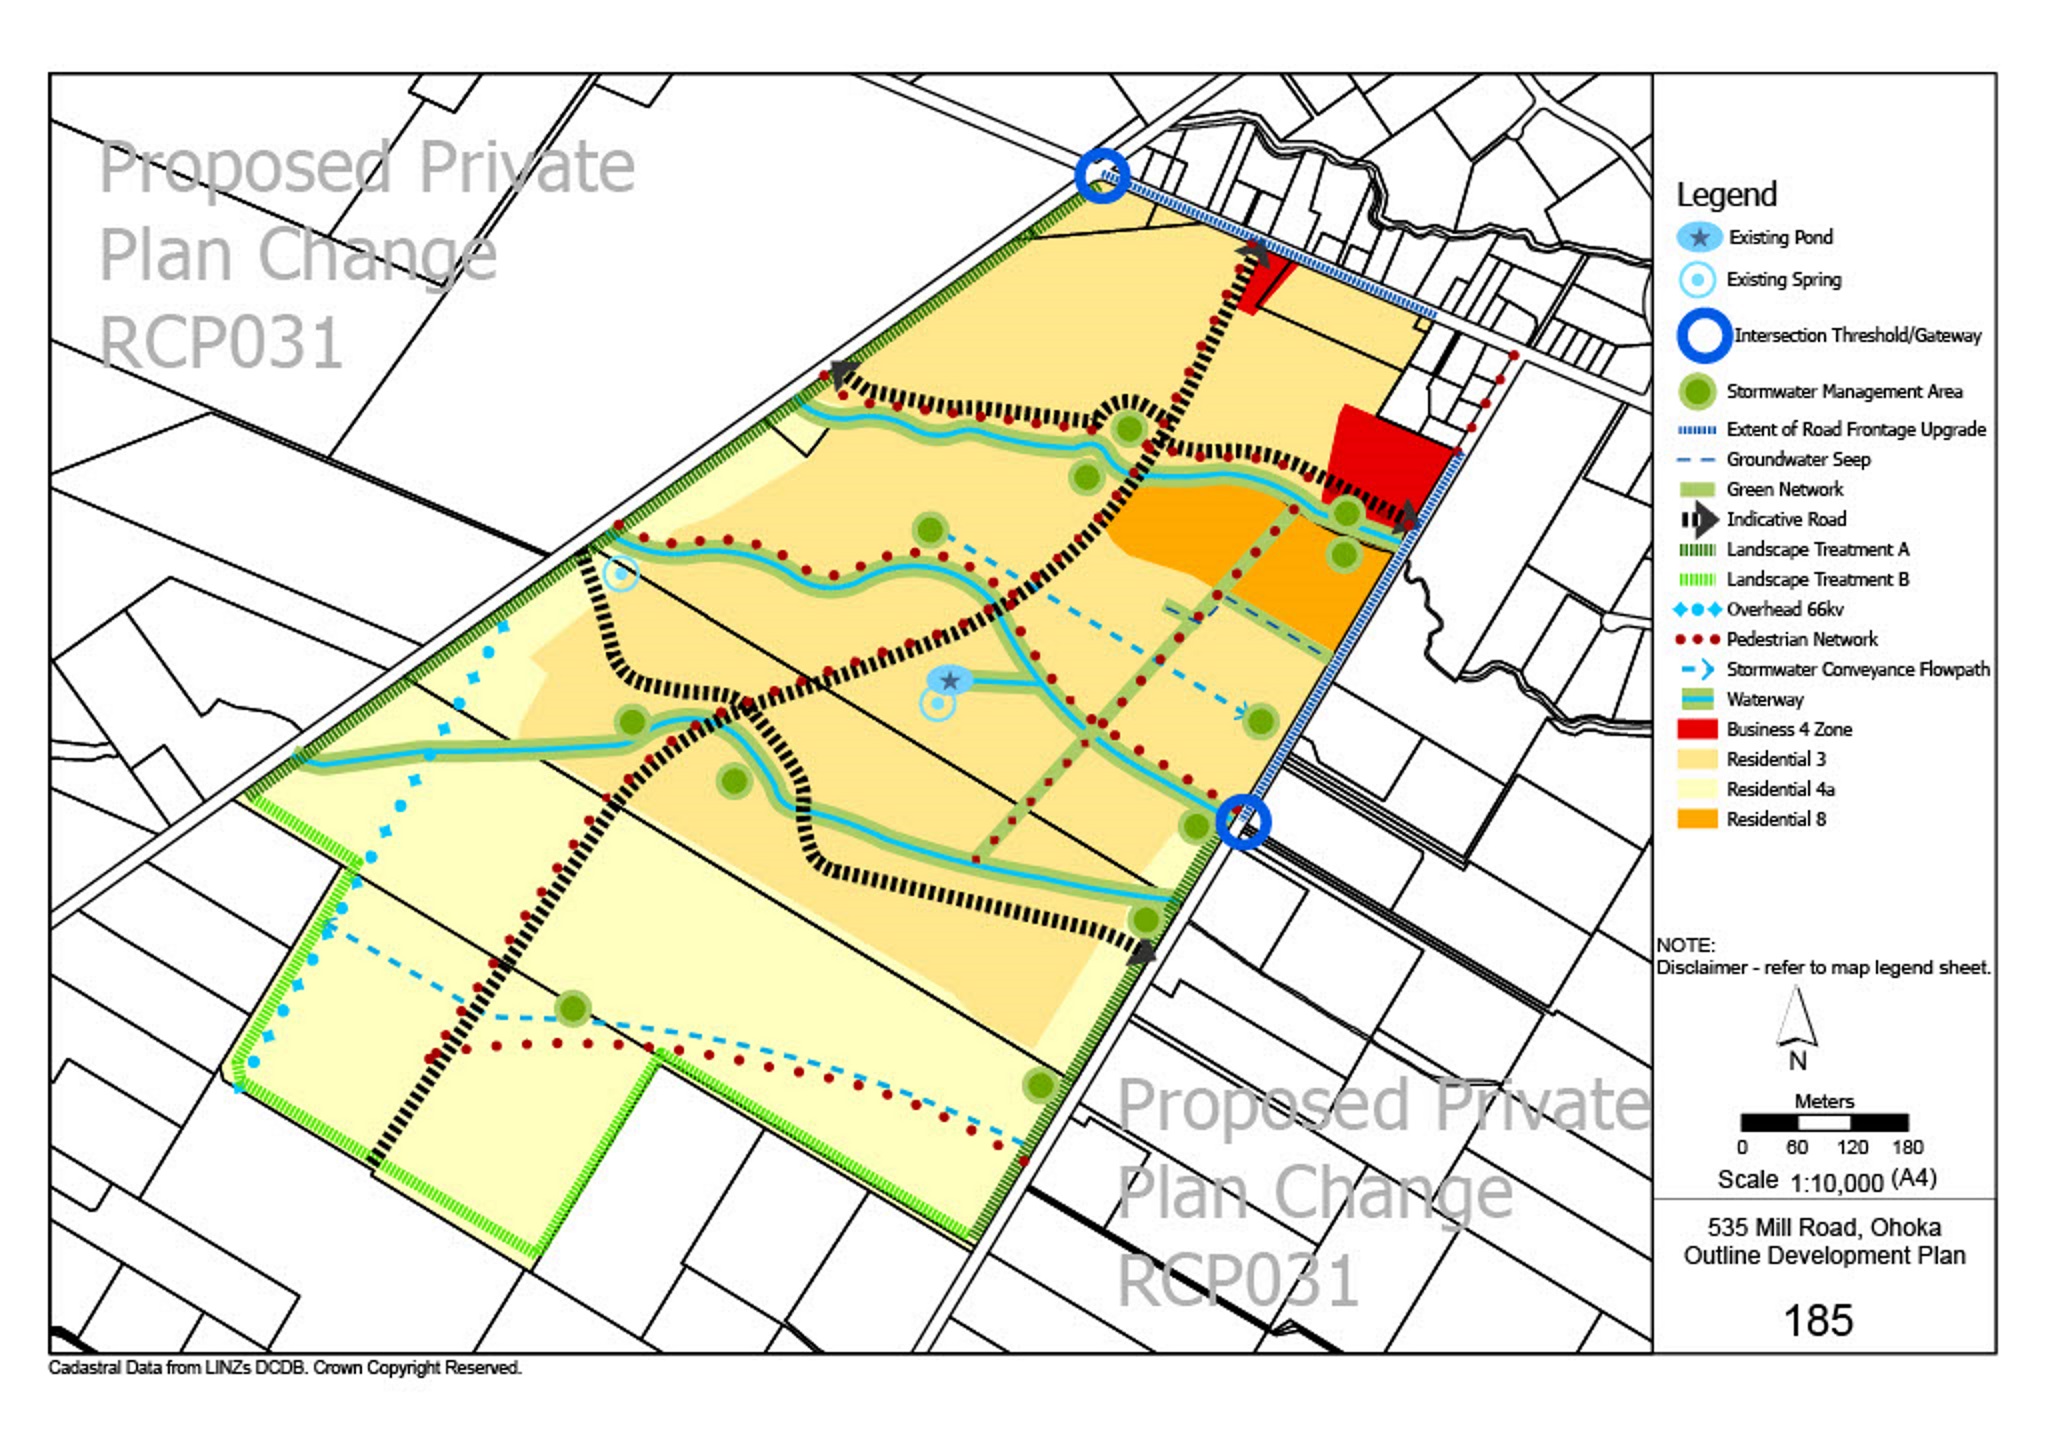 A private plan change application for a proposed 155.9 hectare development at Ohoka has been...